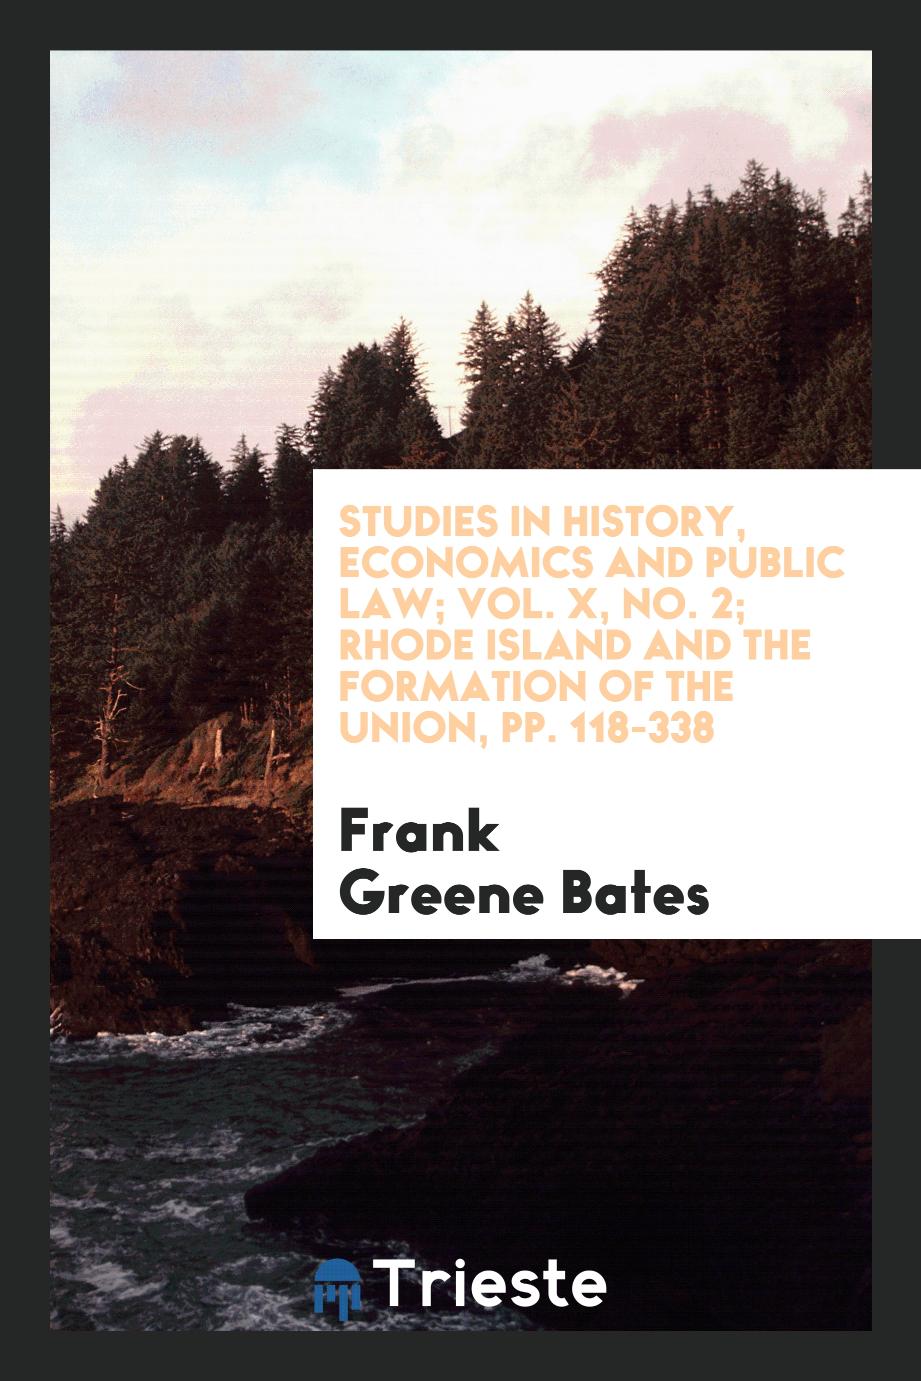 Studies in History, Economics and Public Law; Vol. X, No. 2; Rhode Island and the formation of the Union, pp. 118-338